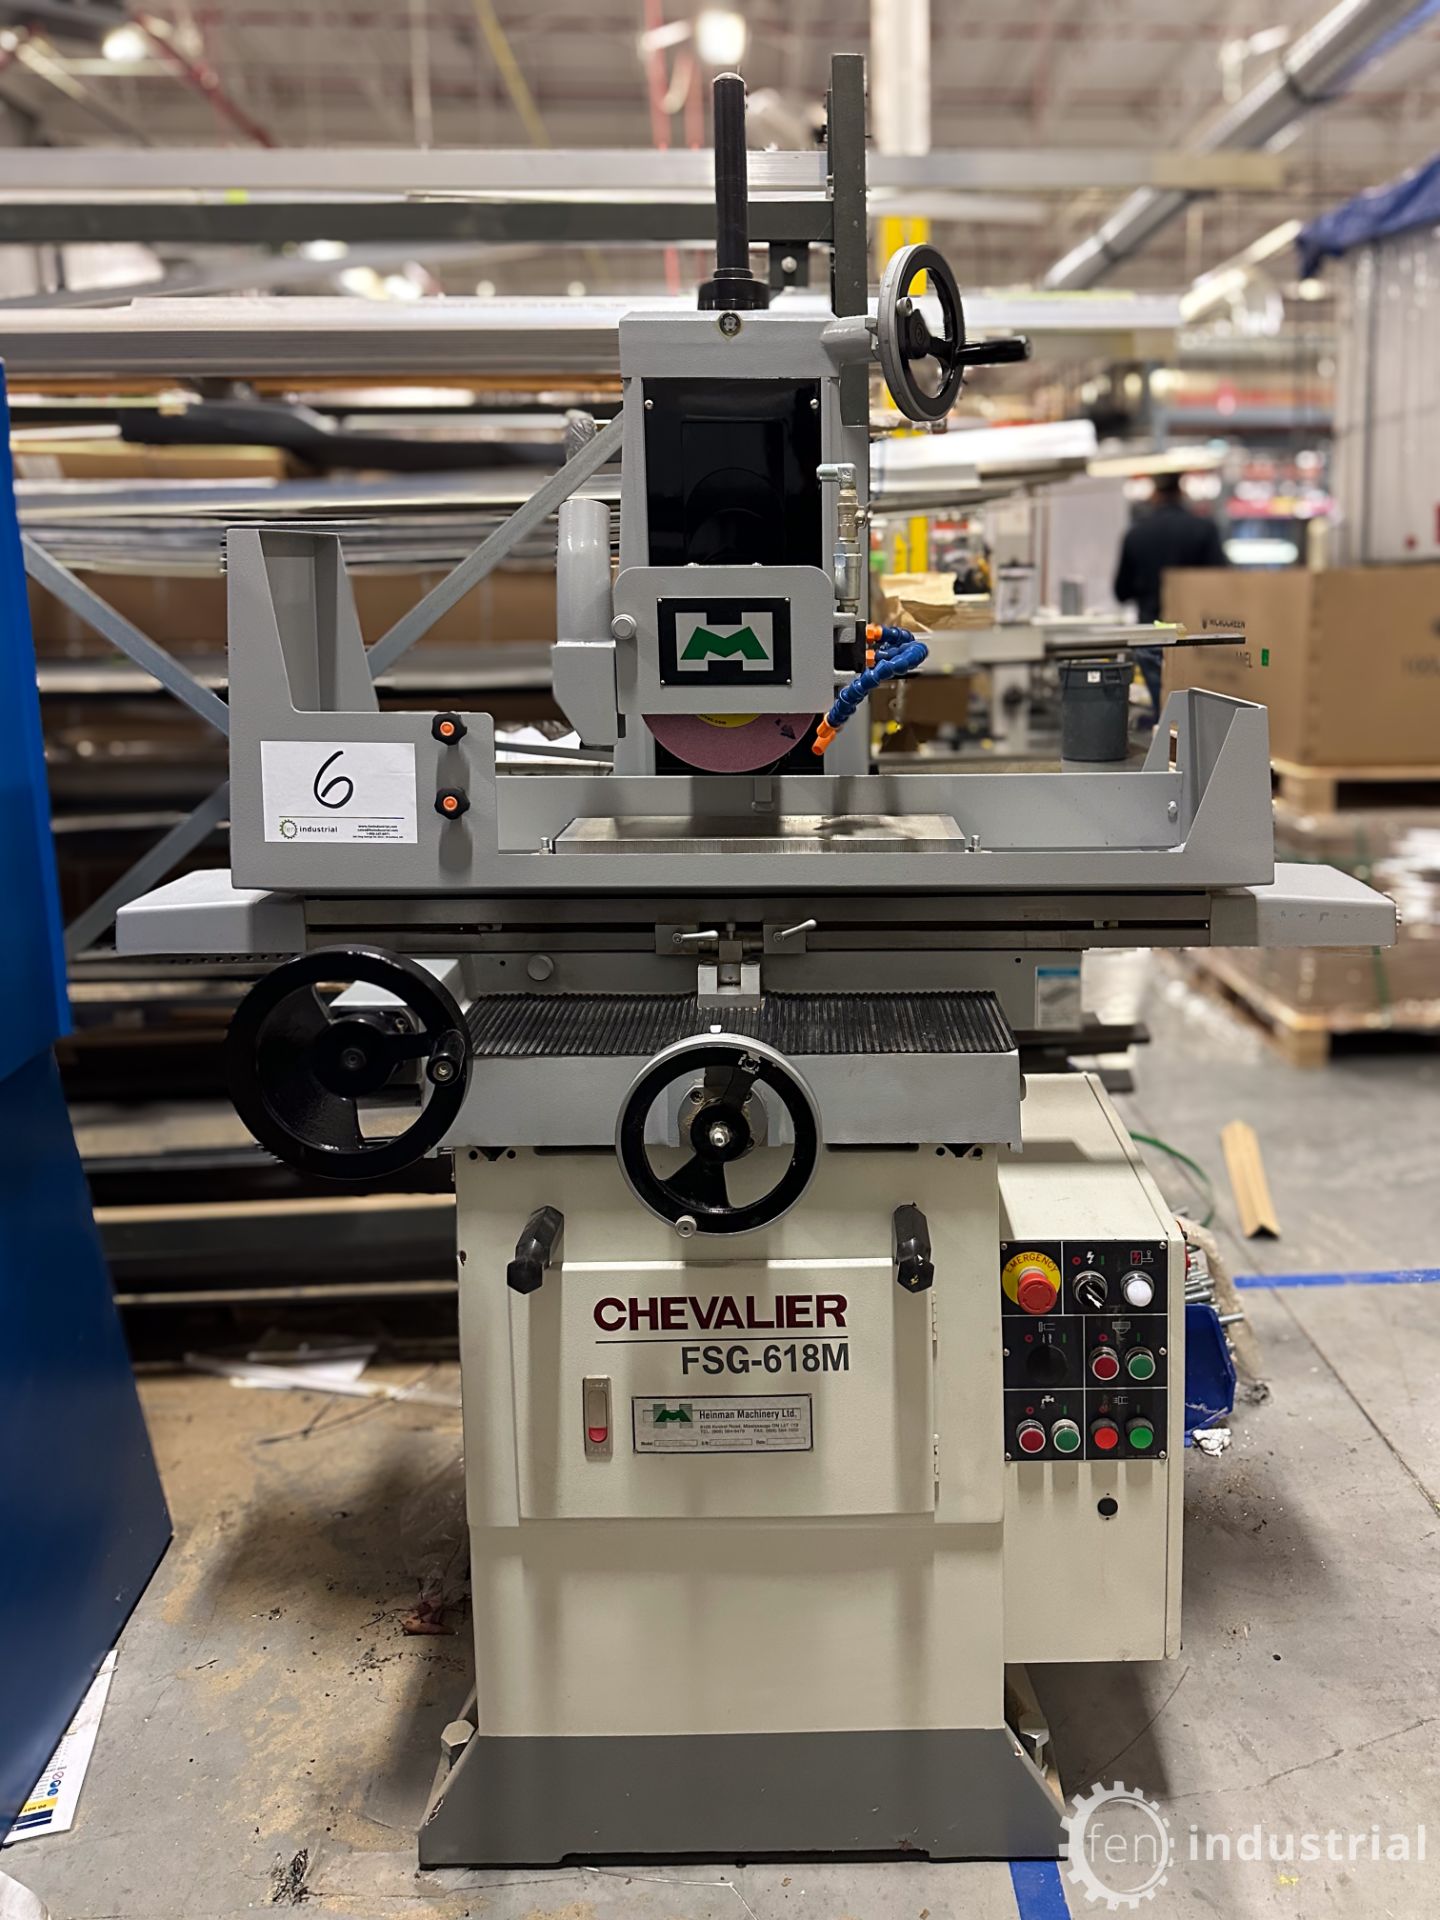 NEW / UNUSED CHEVALIER FSG-618M MANUAL SURFACE GRINDER, 6” X 18” MAGNETIC CHUCK, S/N FA3185015 (